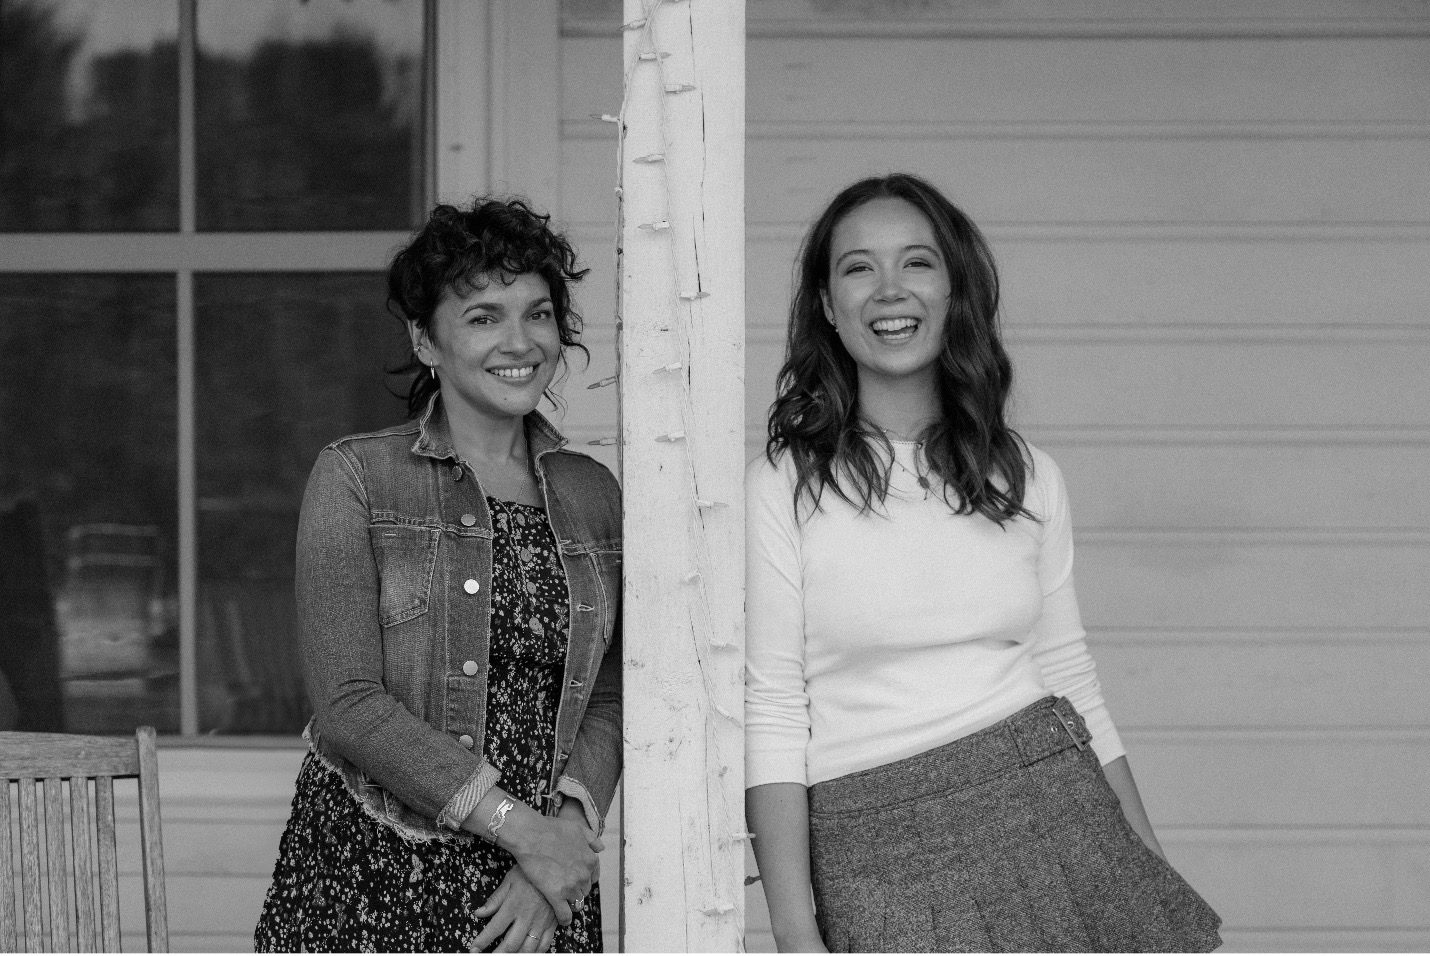 NORAH JONES & LAUFEY COLLABORATE ON A COZY PAIR OF NEW HOLIDAY 